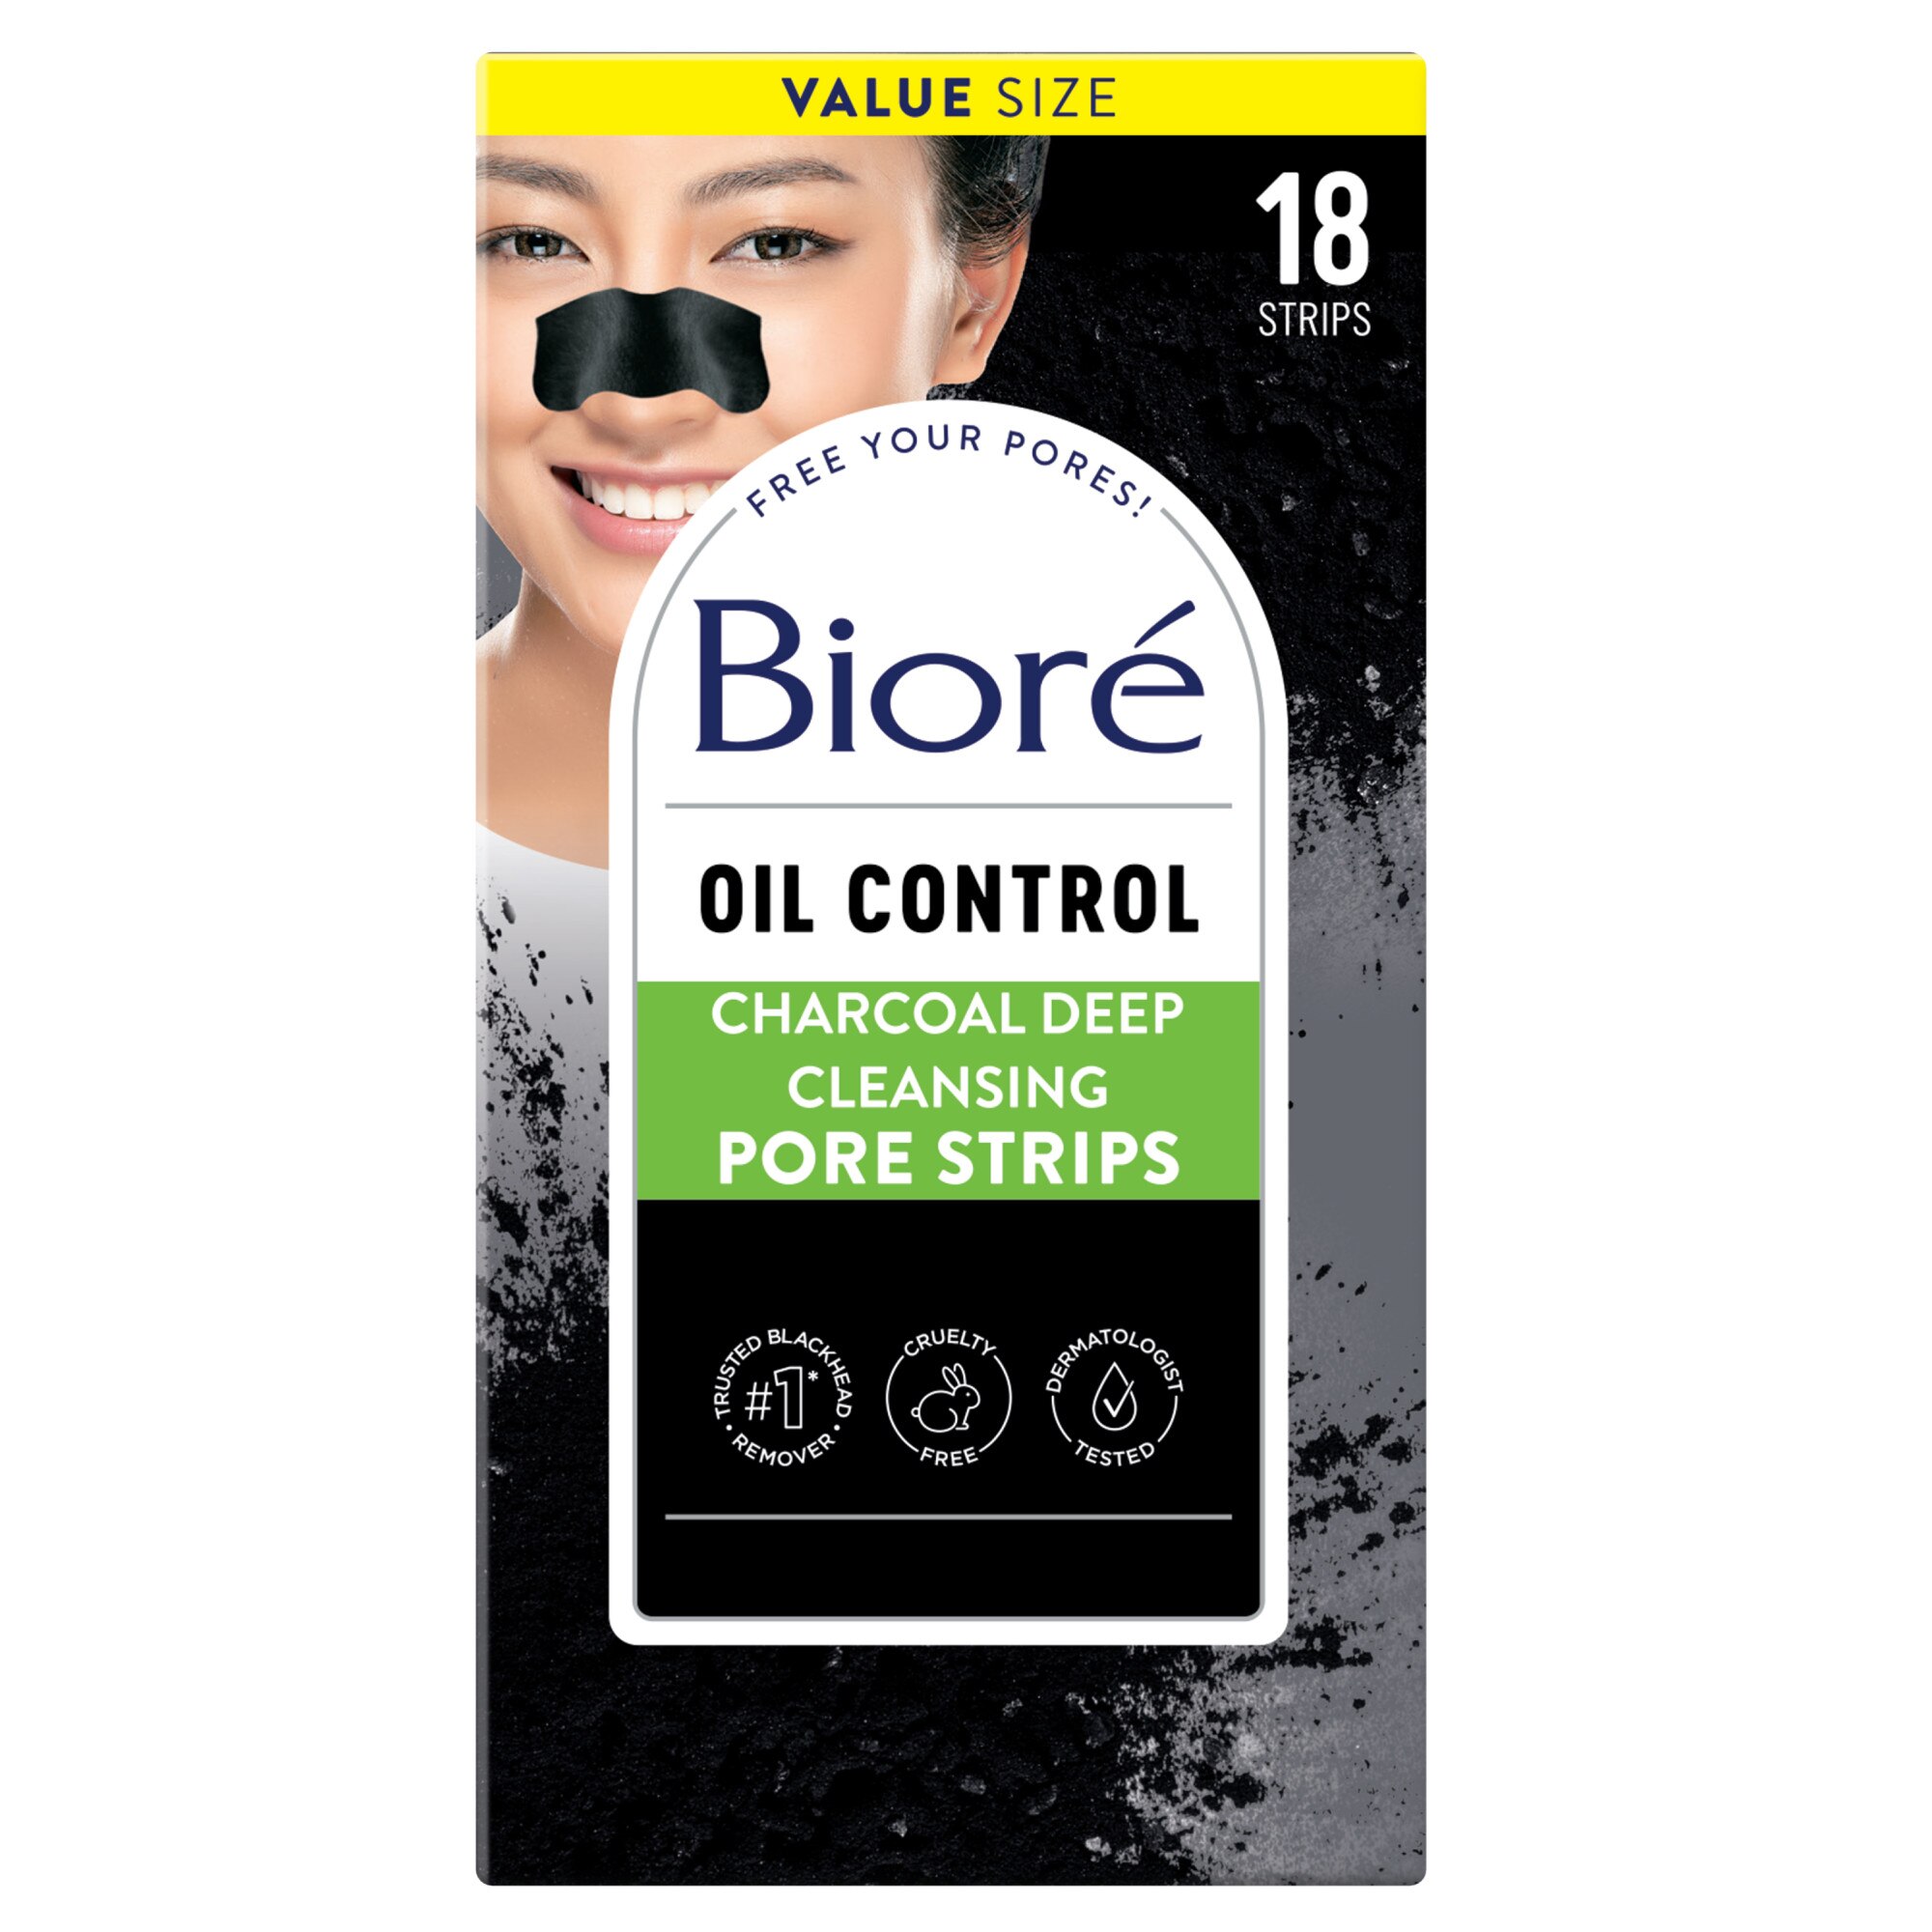 Biore Value Size Deep Cleansing Charcoal Pore Strips, 18CT